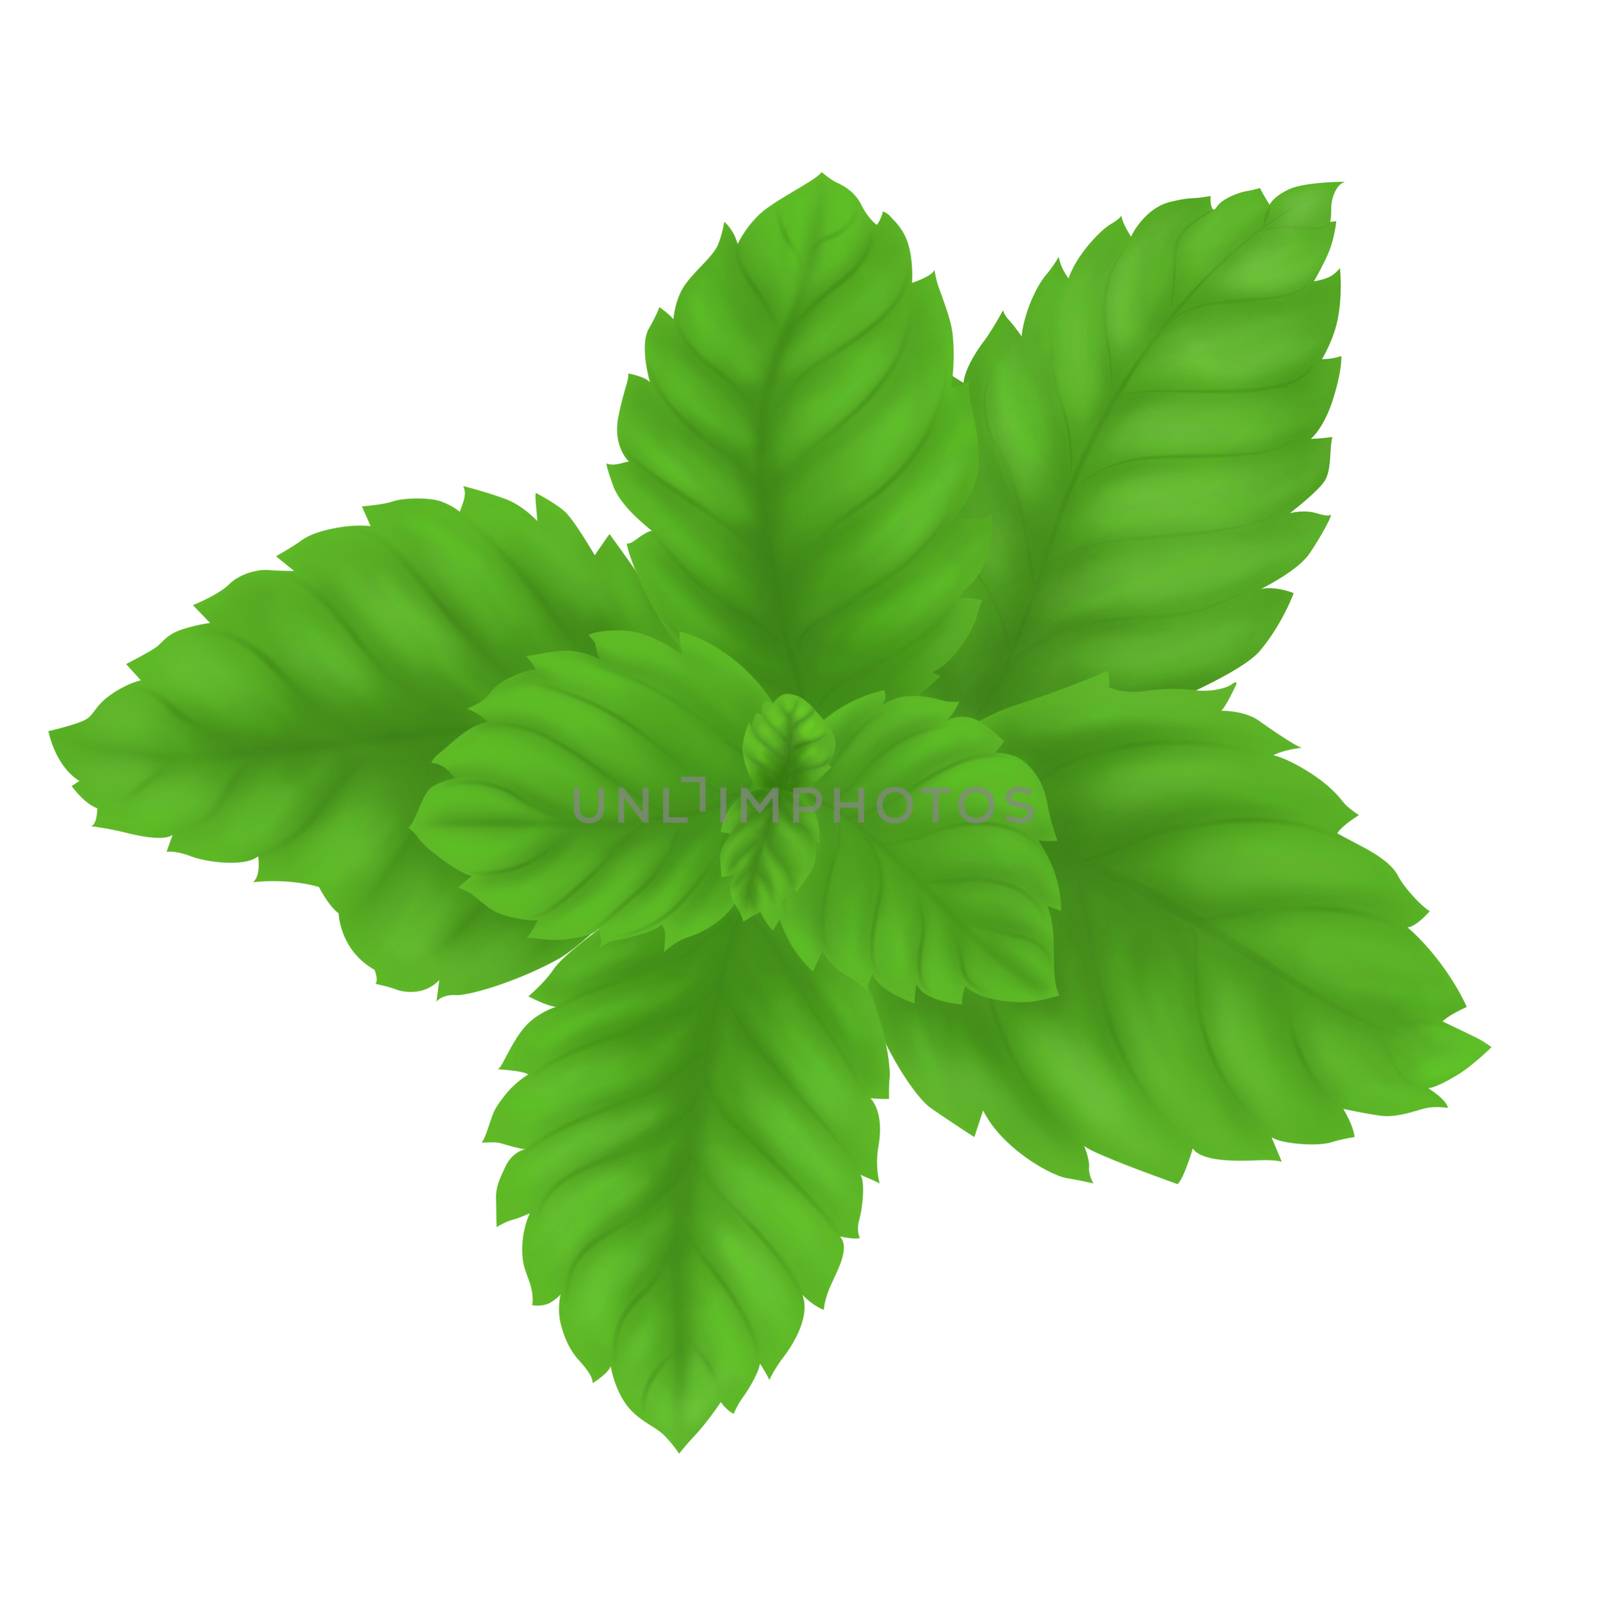 Digital painting pepper mint leaves isolated on white background by pt.pongsak@gmail.com